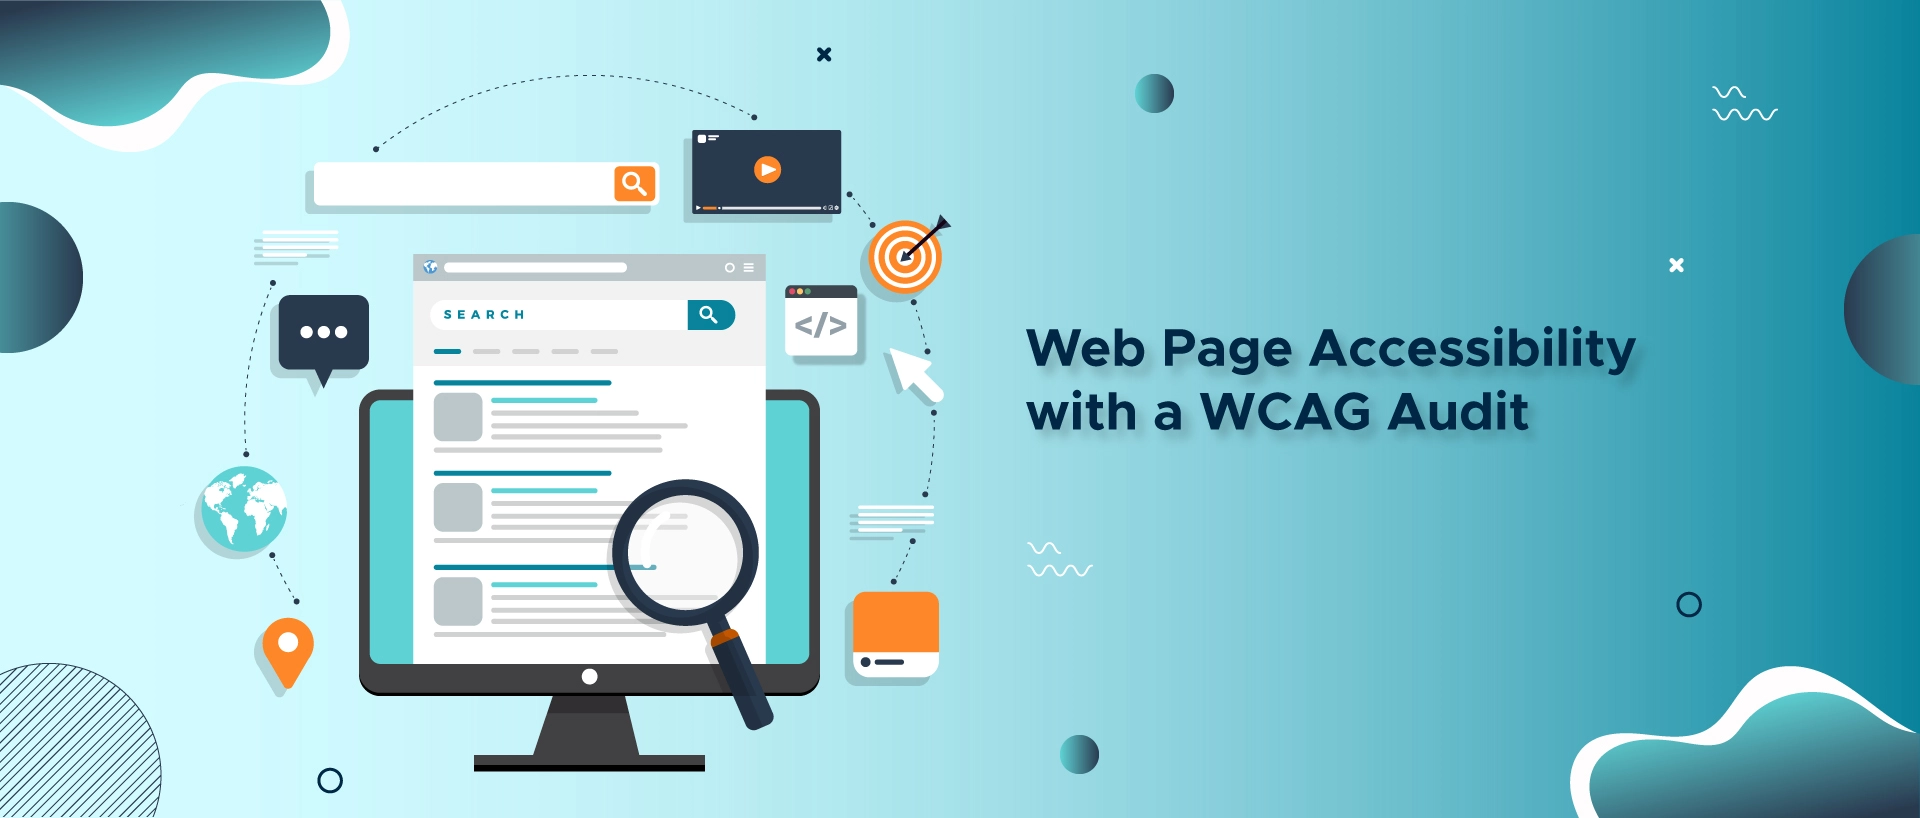 How to Conduct a WCAG Audit to Assess the Accessibility of a Webpage?